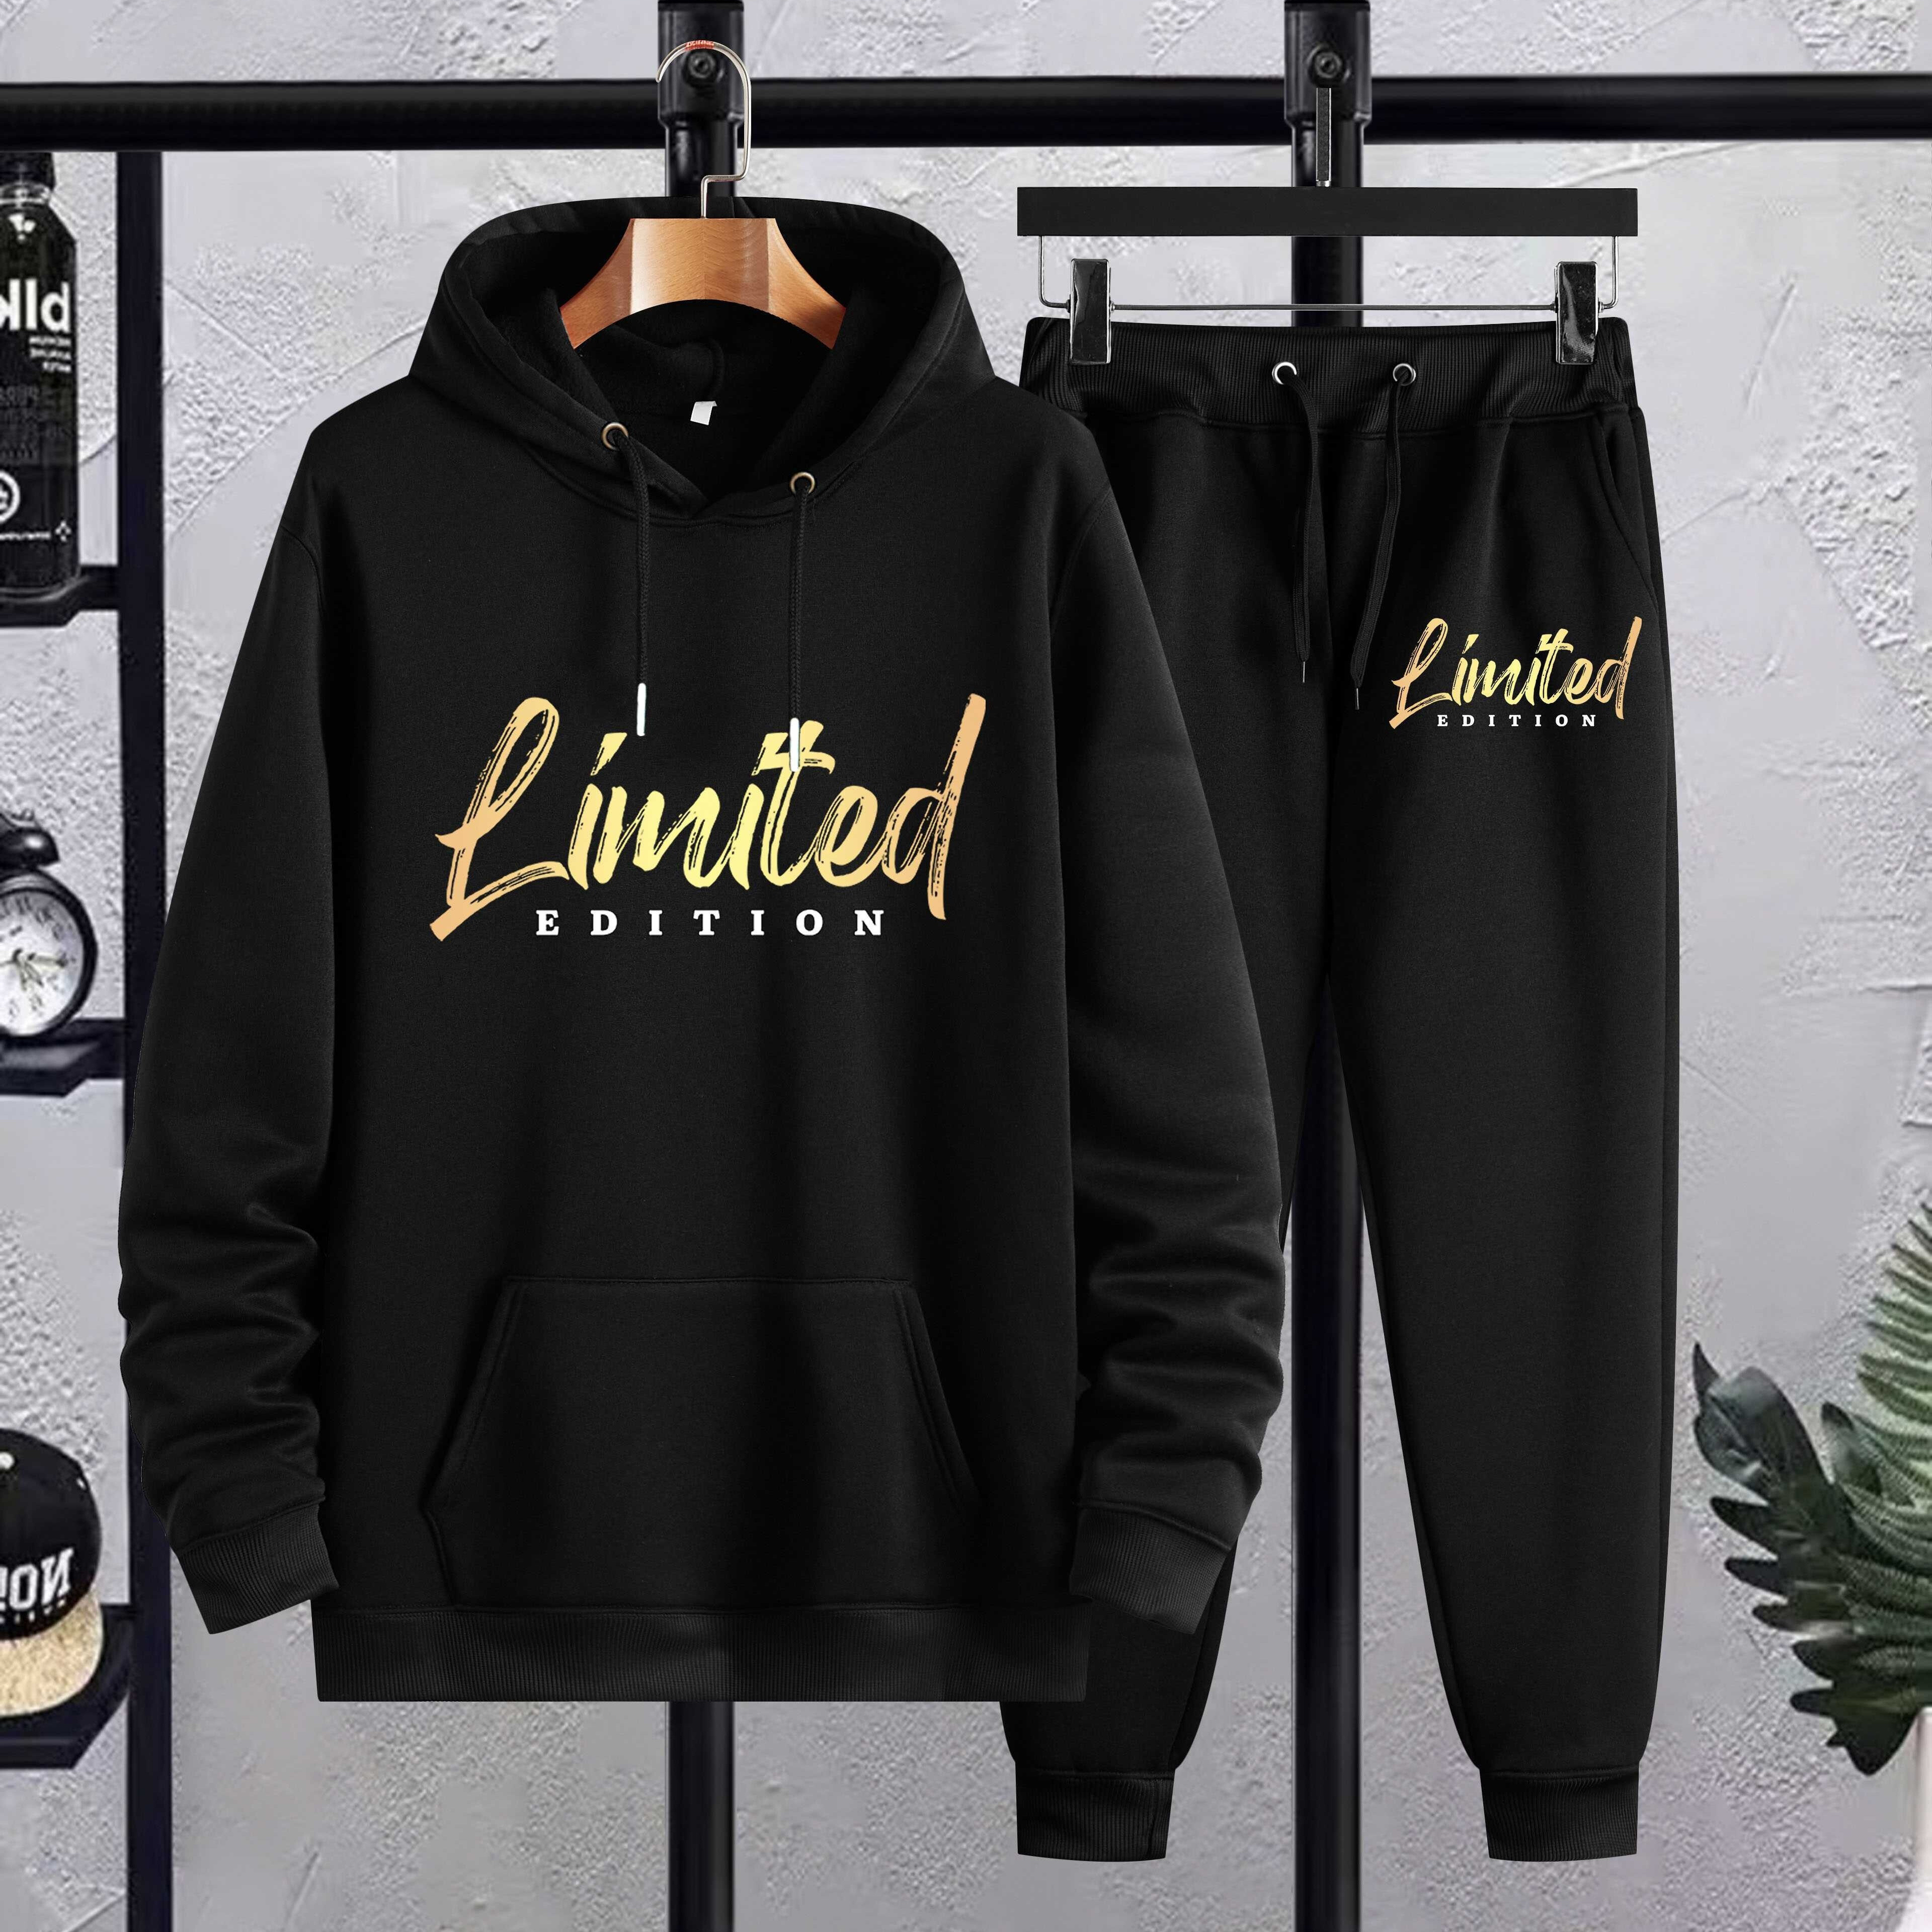 

Plus Size Men's "limited Edition" Print Hooded Sweatshirt & Sweatpants Set For Spring Fall Winter, Men's Clothing